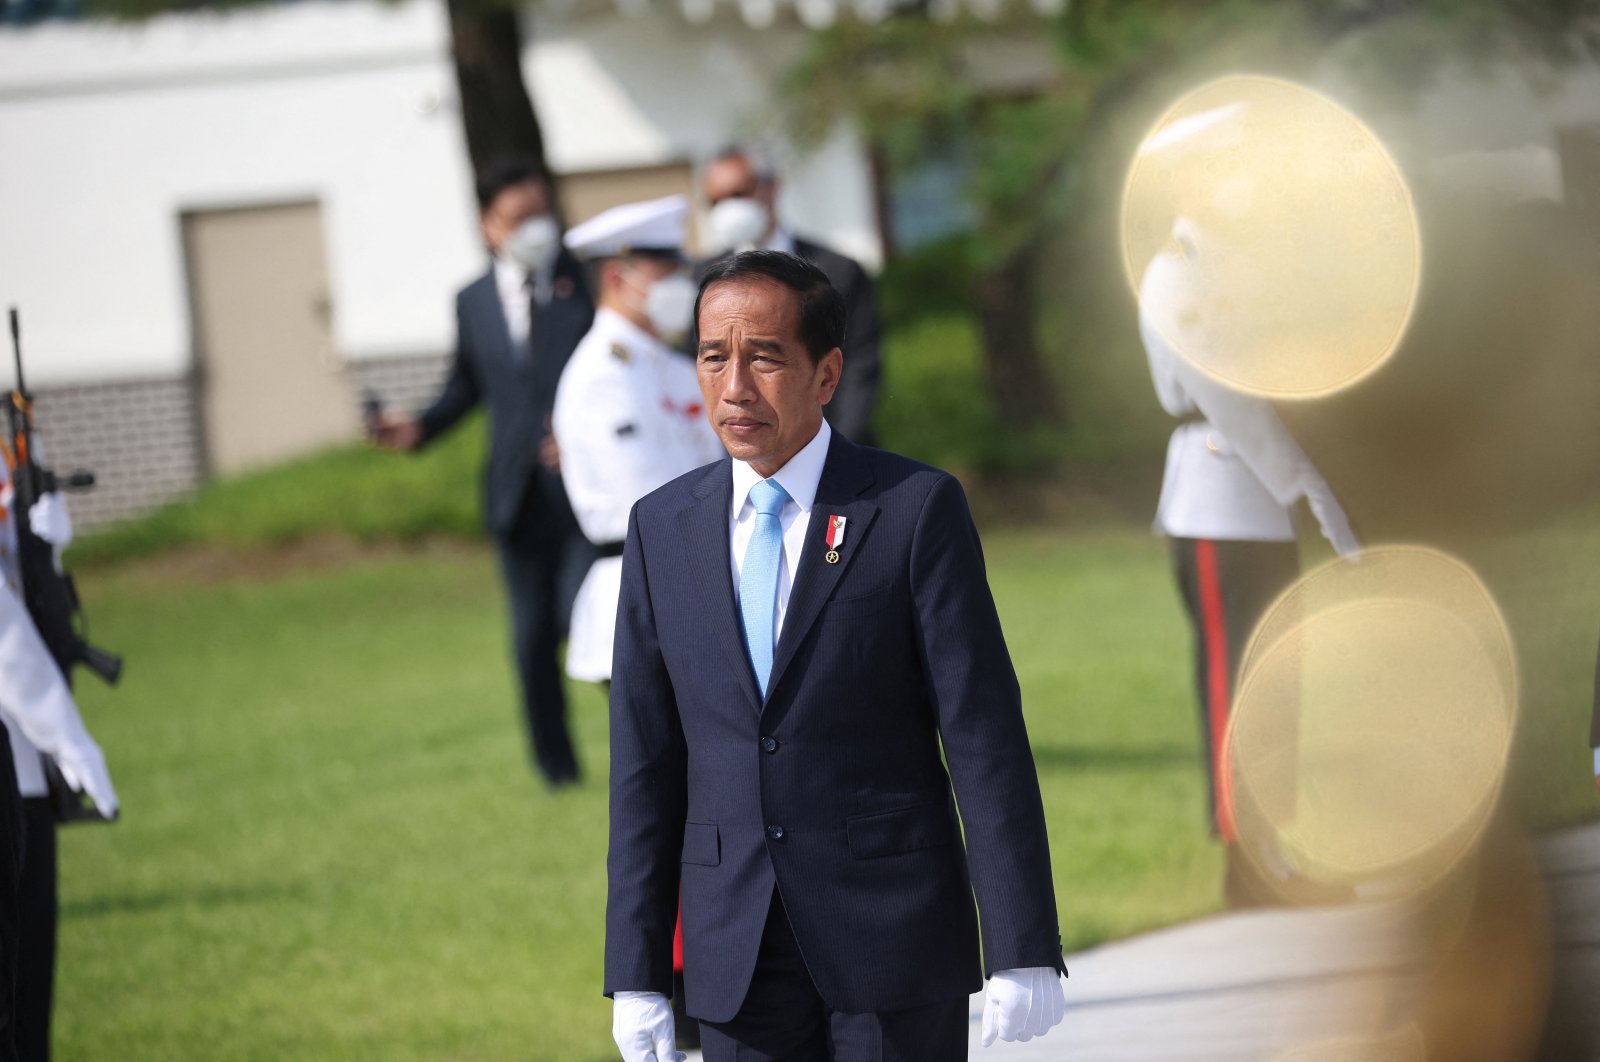 Indonesian President Joko Widodo arrives at the national cemetery in Seoul, South Korea, July 28, 2022. (Reuters Photo)